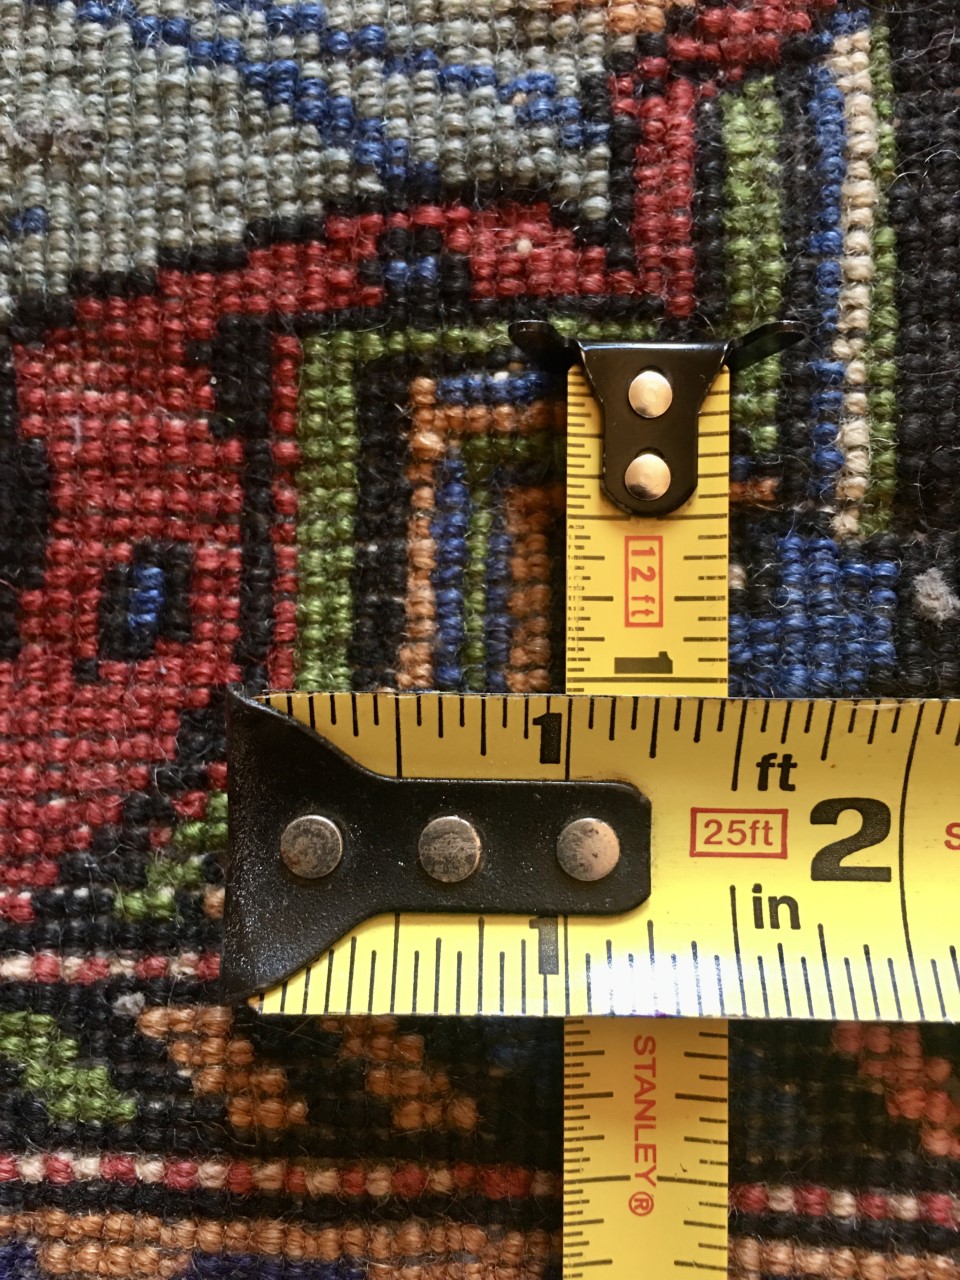 A detailed photo from the back of the Shirin Rug, taken so the knotting is more visible. A pair of measuring tapes are pictured, situated perpendicularly to demonstrate how many knots make up one square inch of space